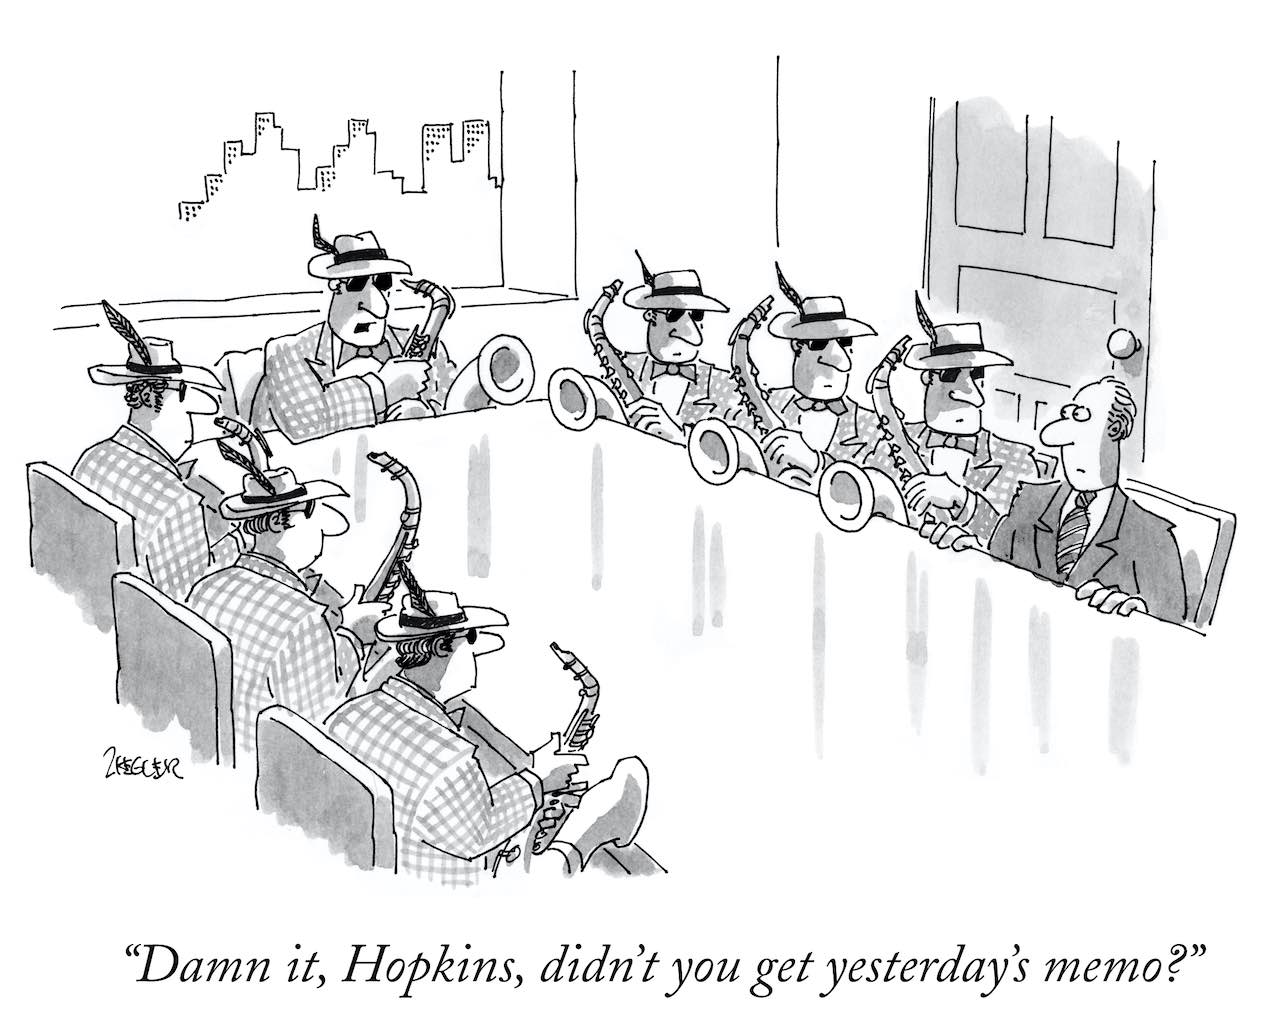 New Yorker cartoon showing most business people at a meeting in ridiculous outfits, but one person isn't.  Caption: Damn it, Hopkins, didn't you get yesteryad's memo? 